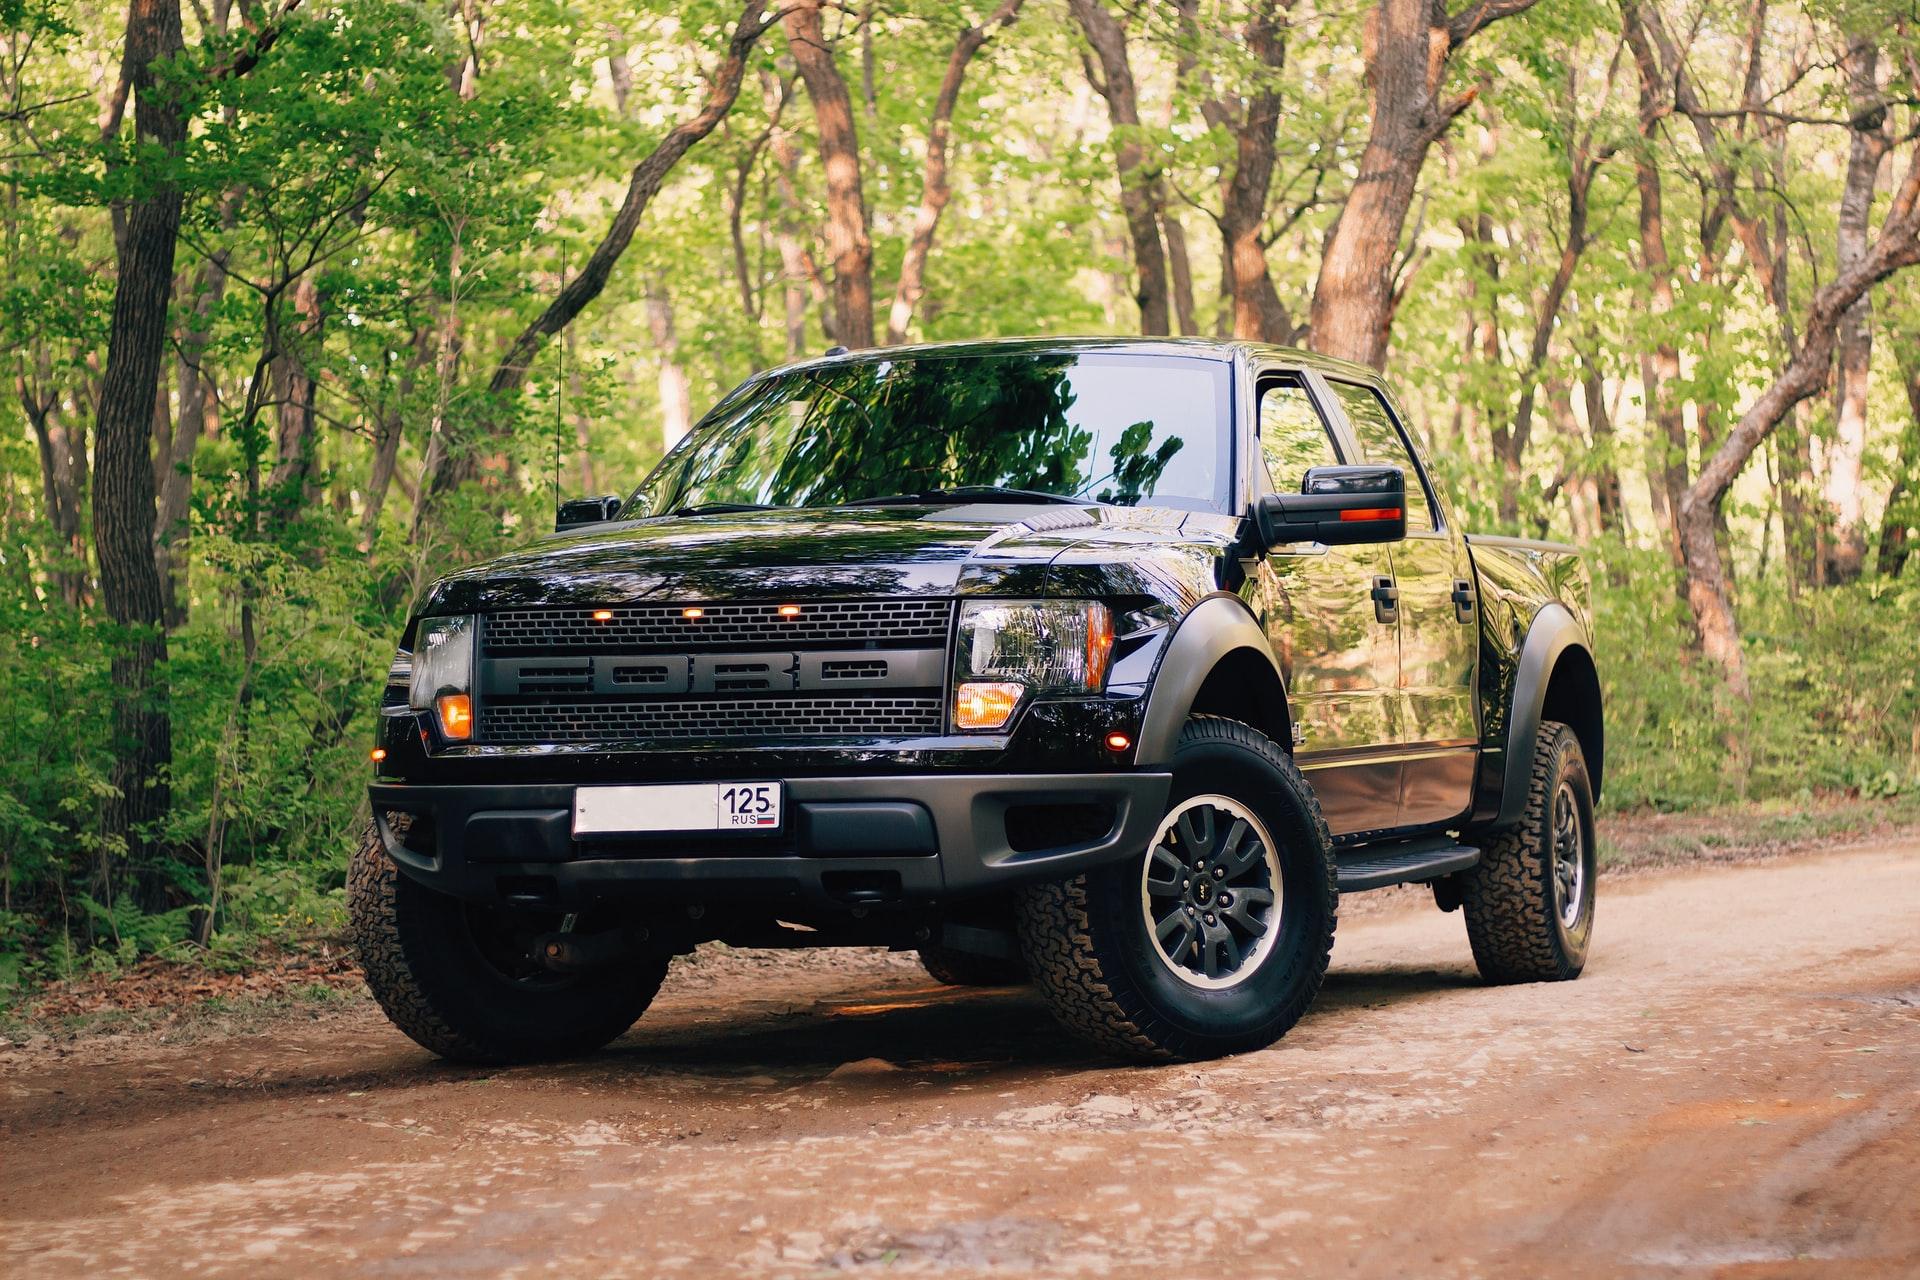 Ford is giving some serious upgrades to off-road lovers.